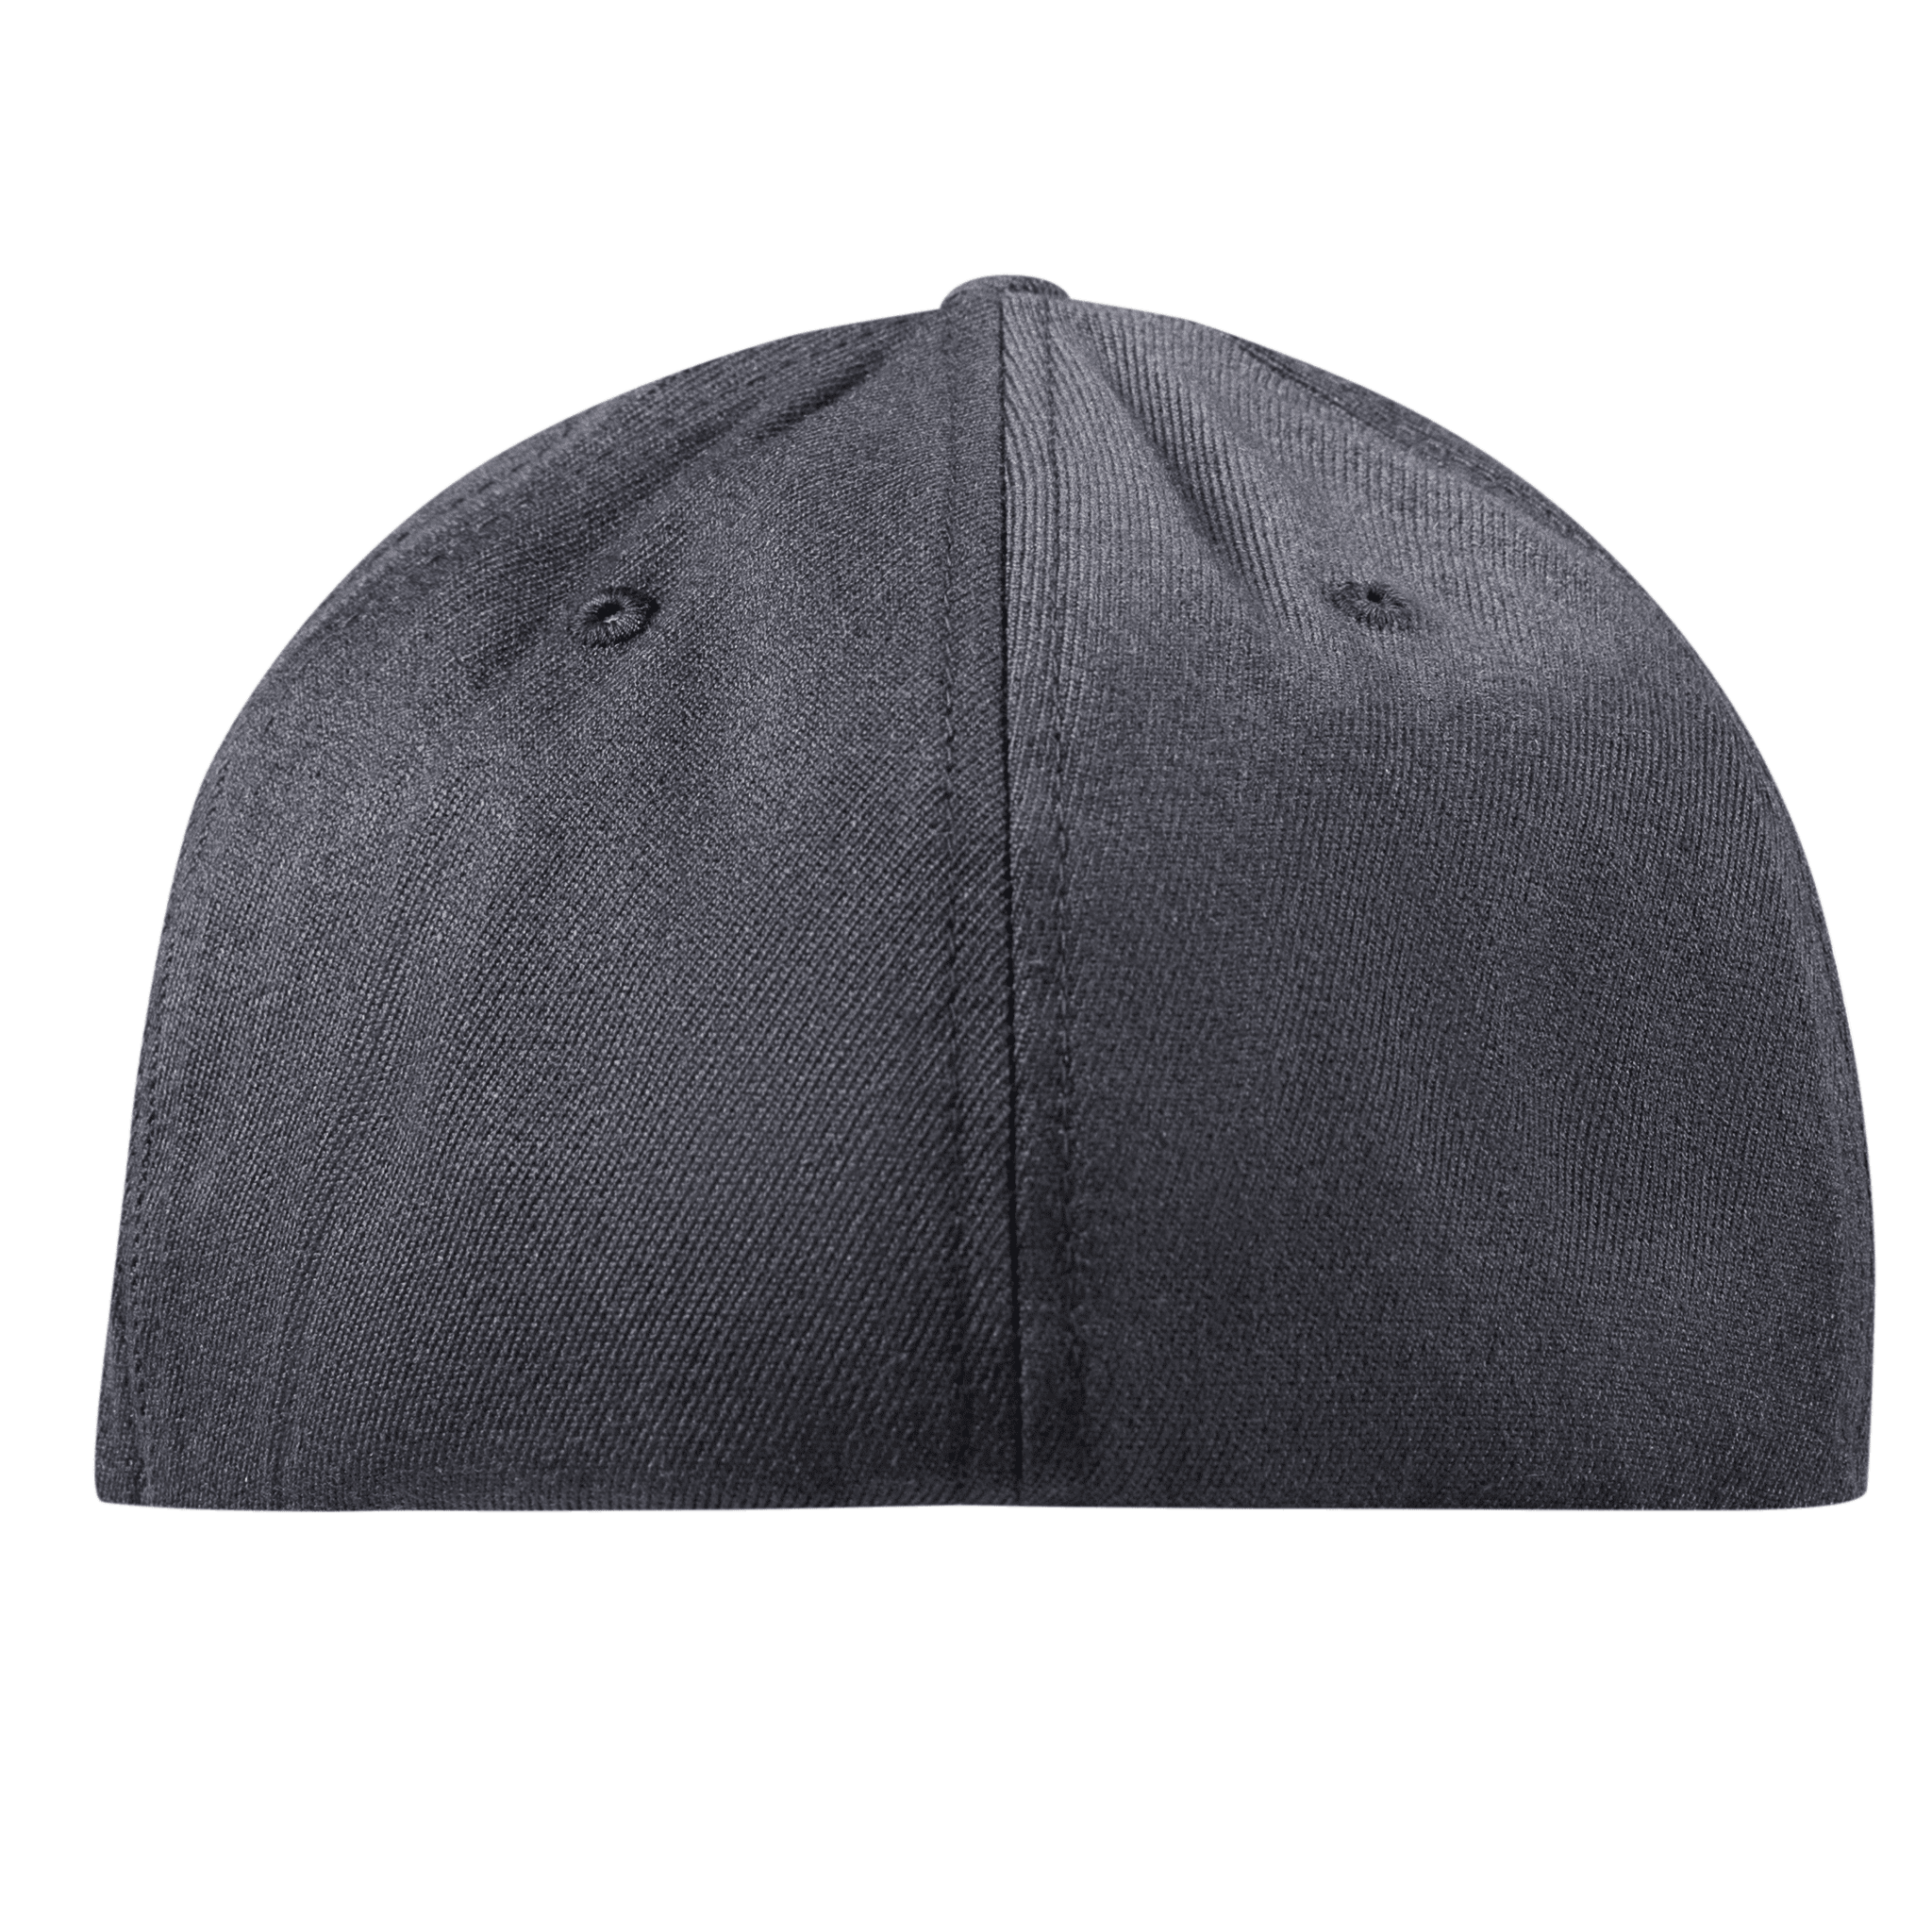 Wisconsin Patriot Flexfit Fitted Back Charcoal